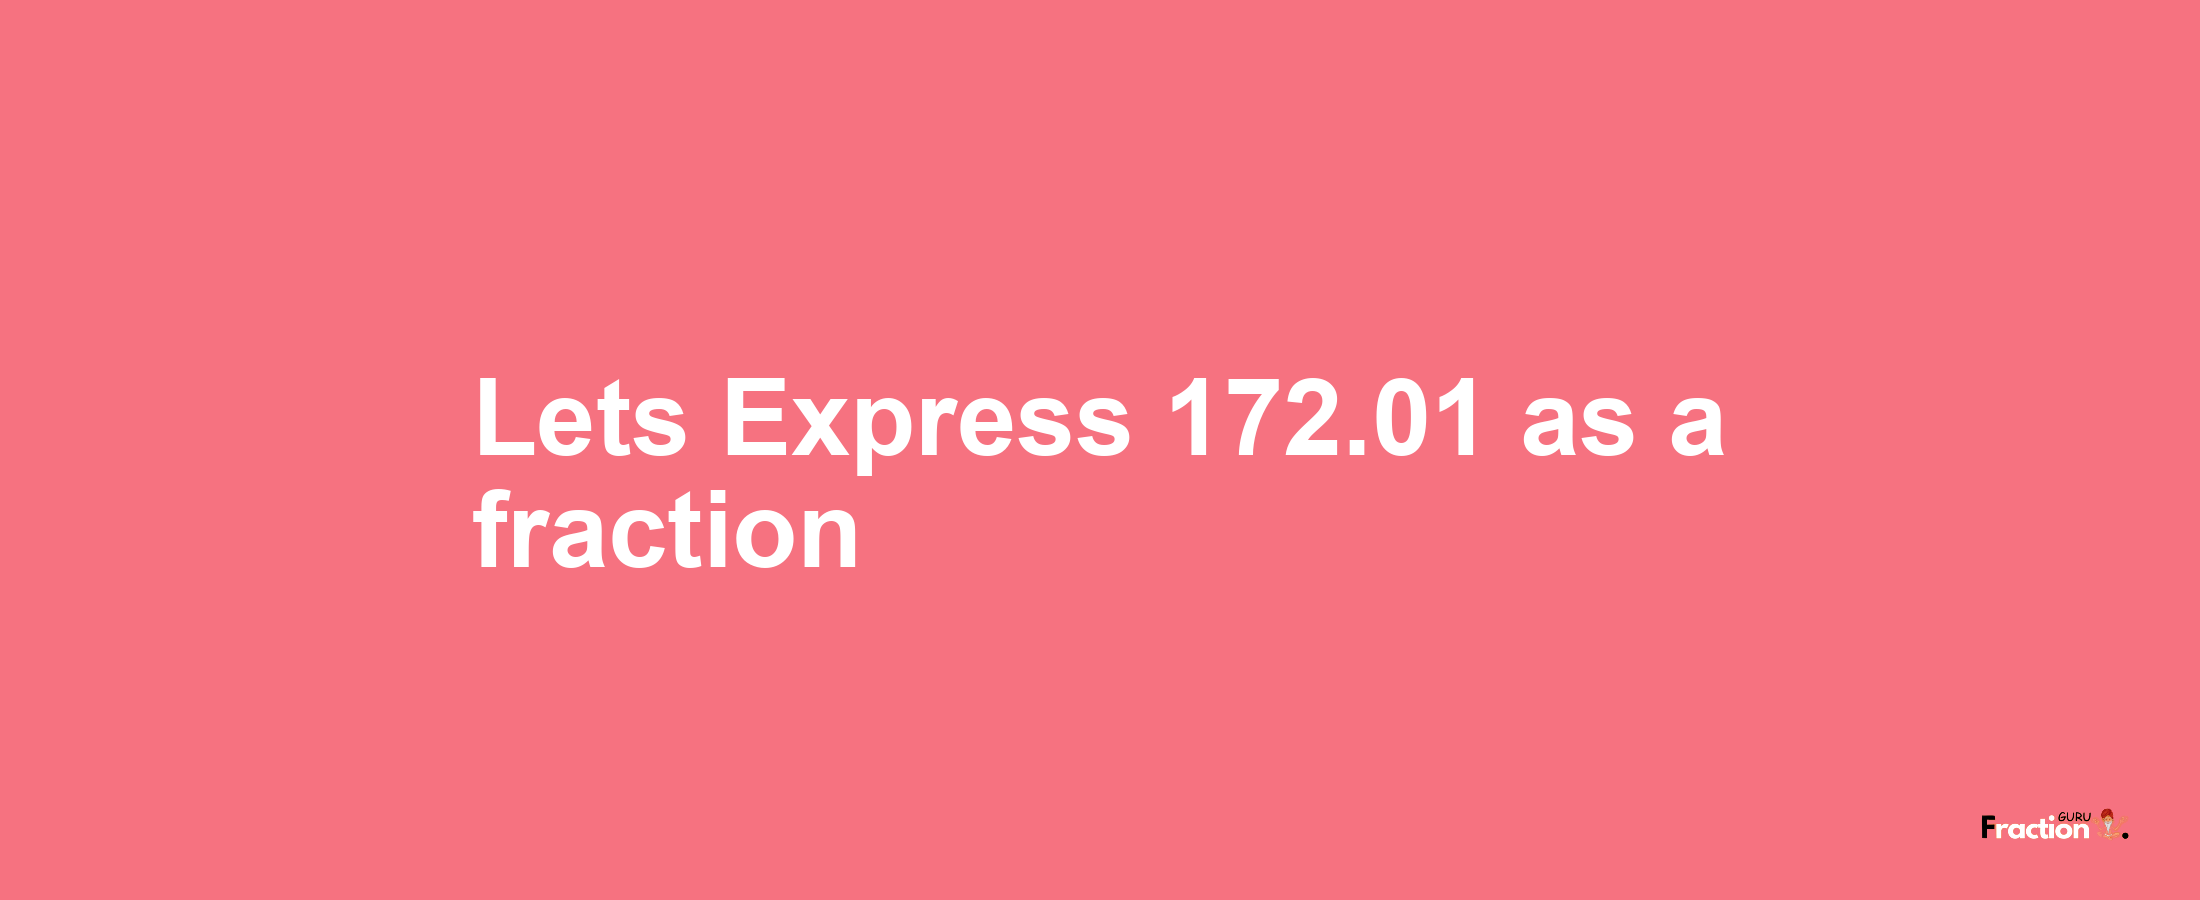 Lets Express 172.01 as afraction